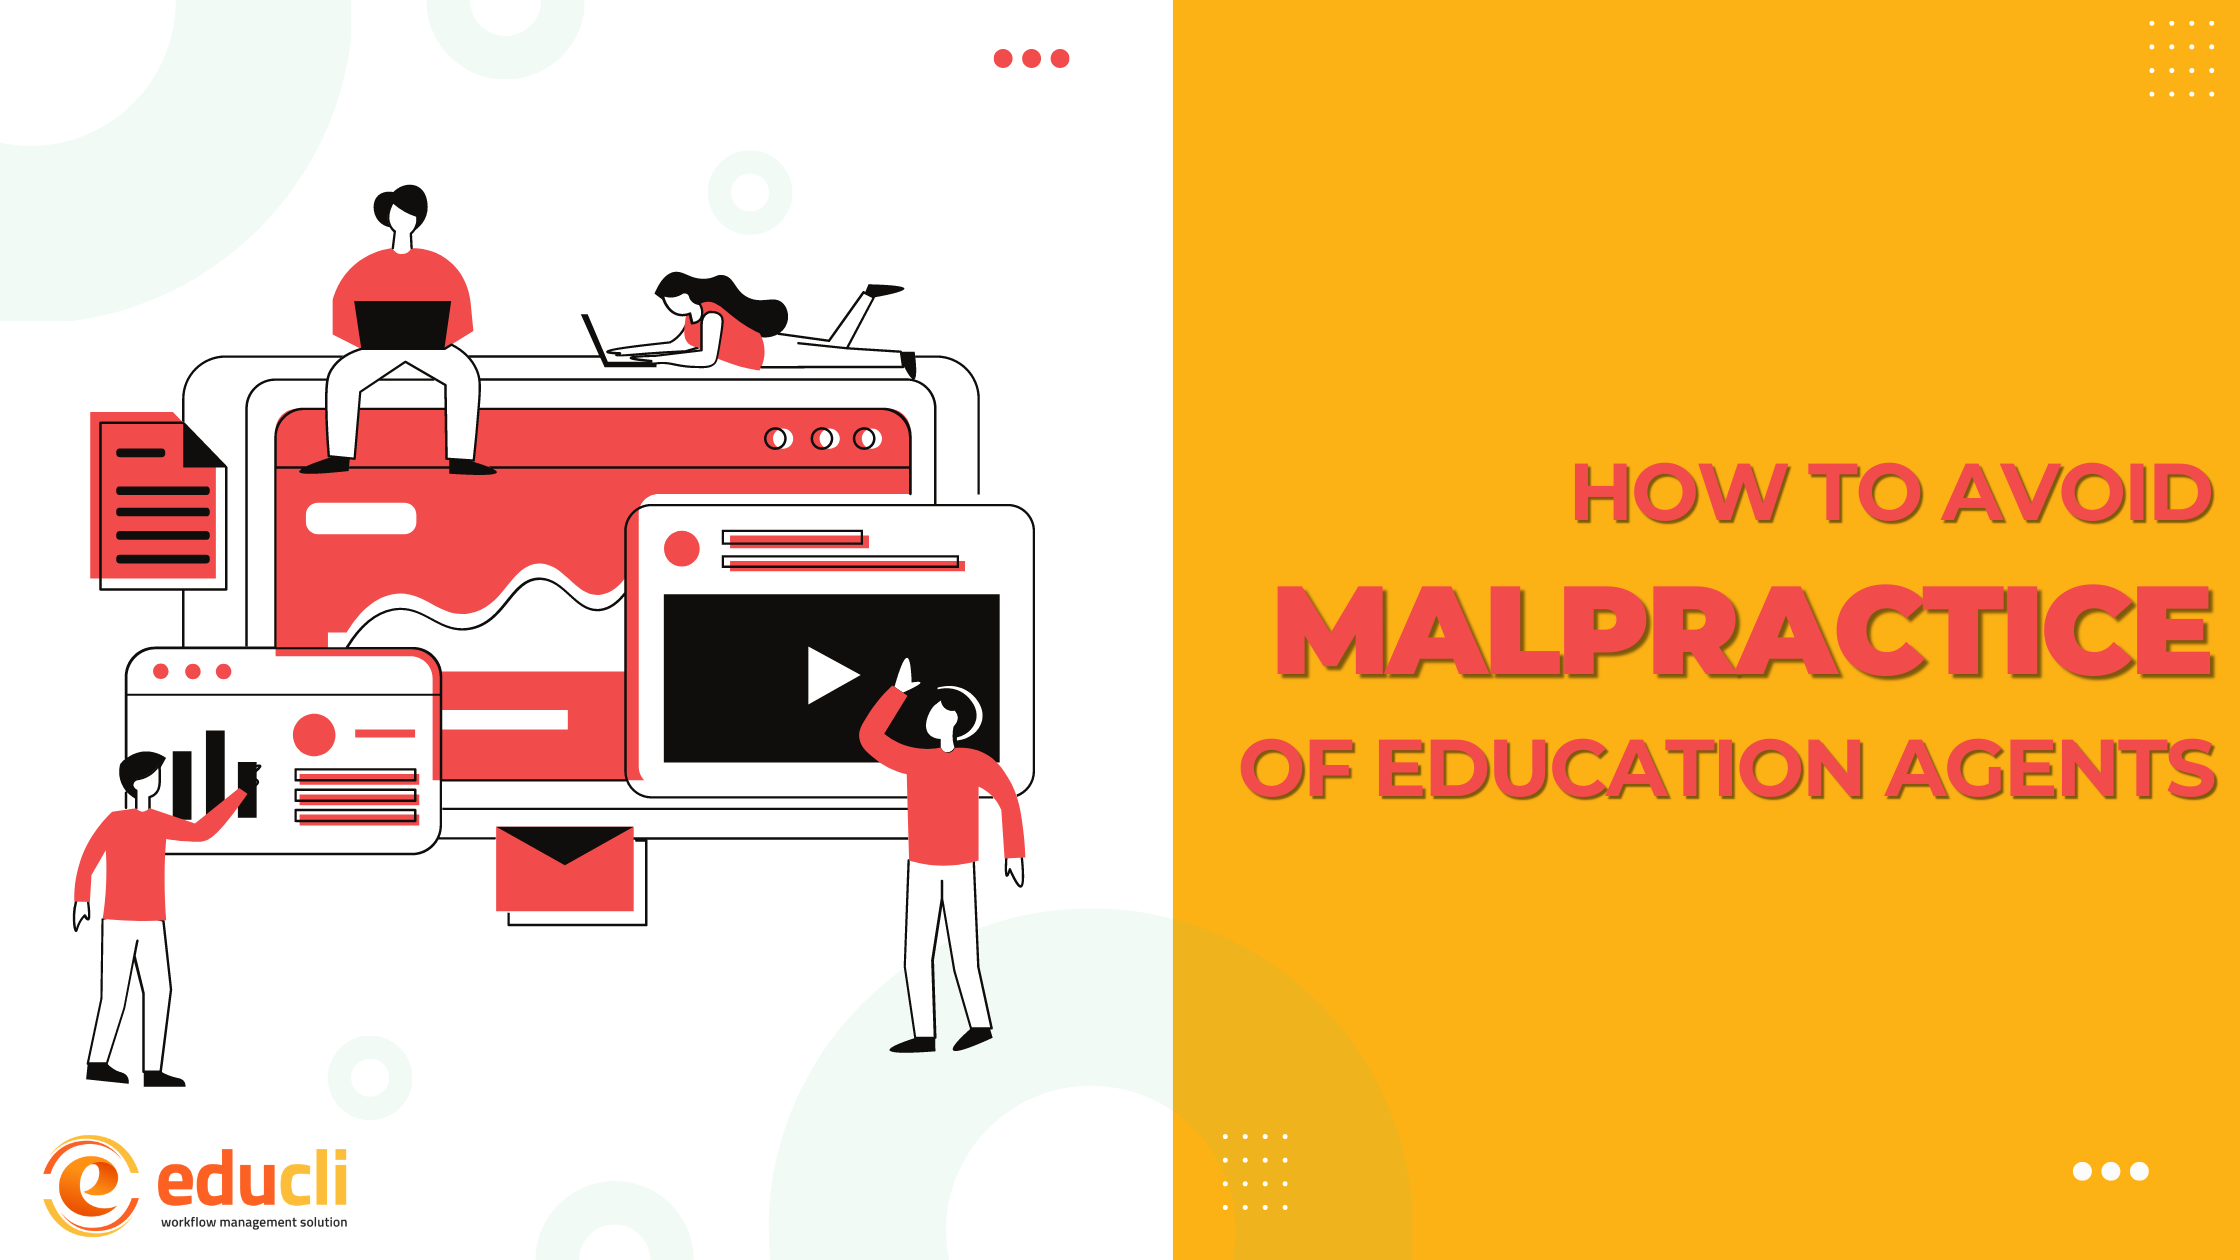 How to avoid malpractice of education agents